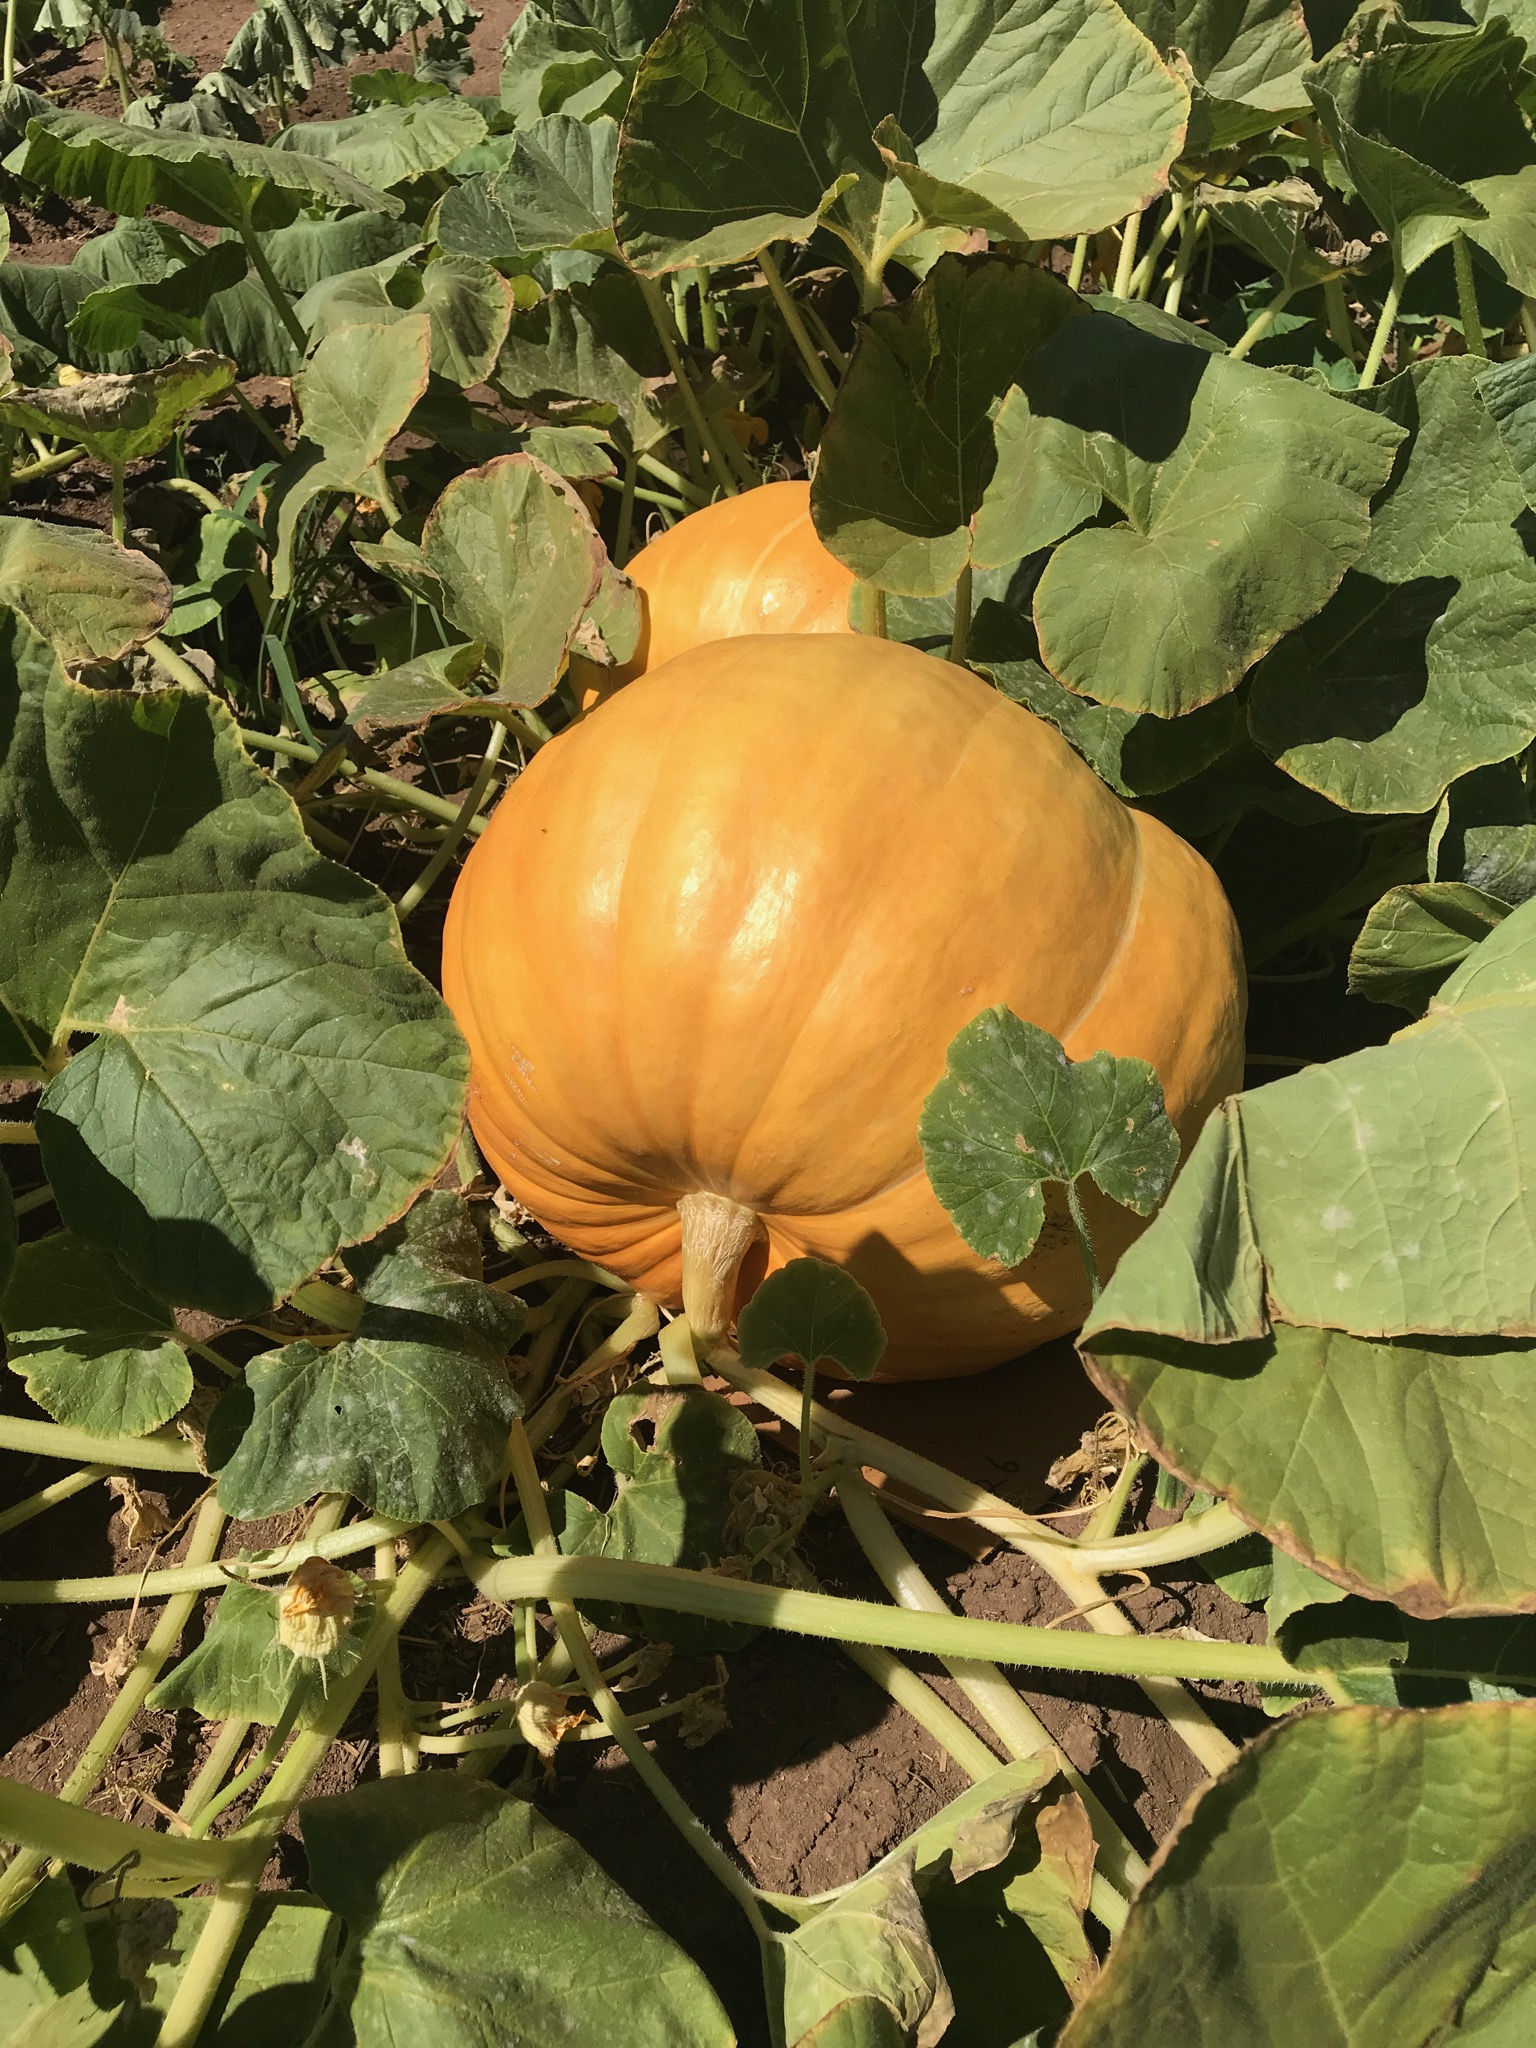 Our pumpkins are growing